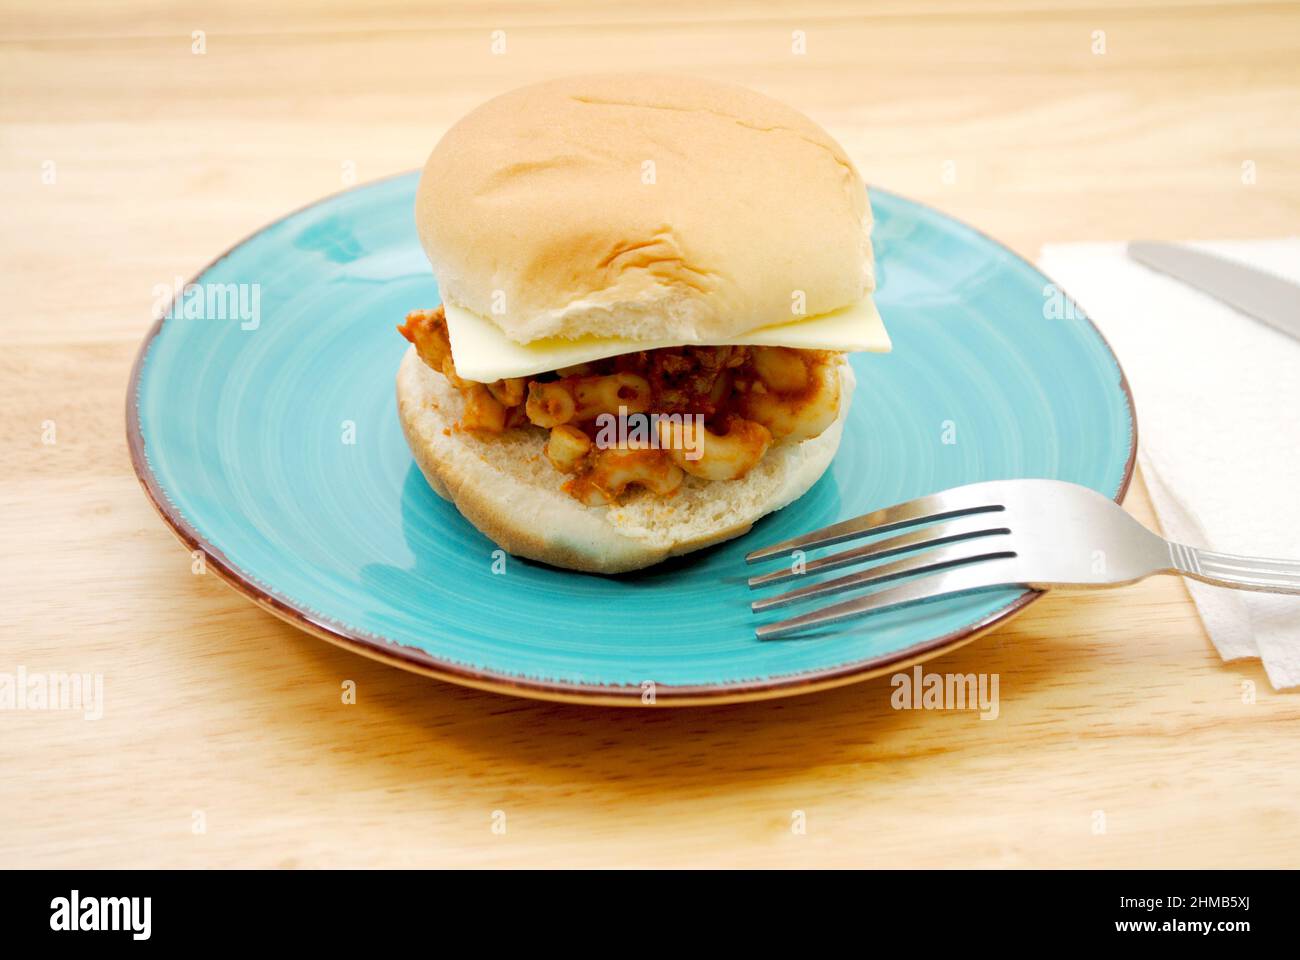 Macaroni Sandwich with Cheese Served on a Blue Plated Stock Photo